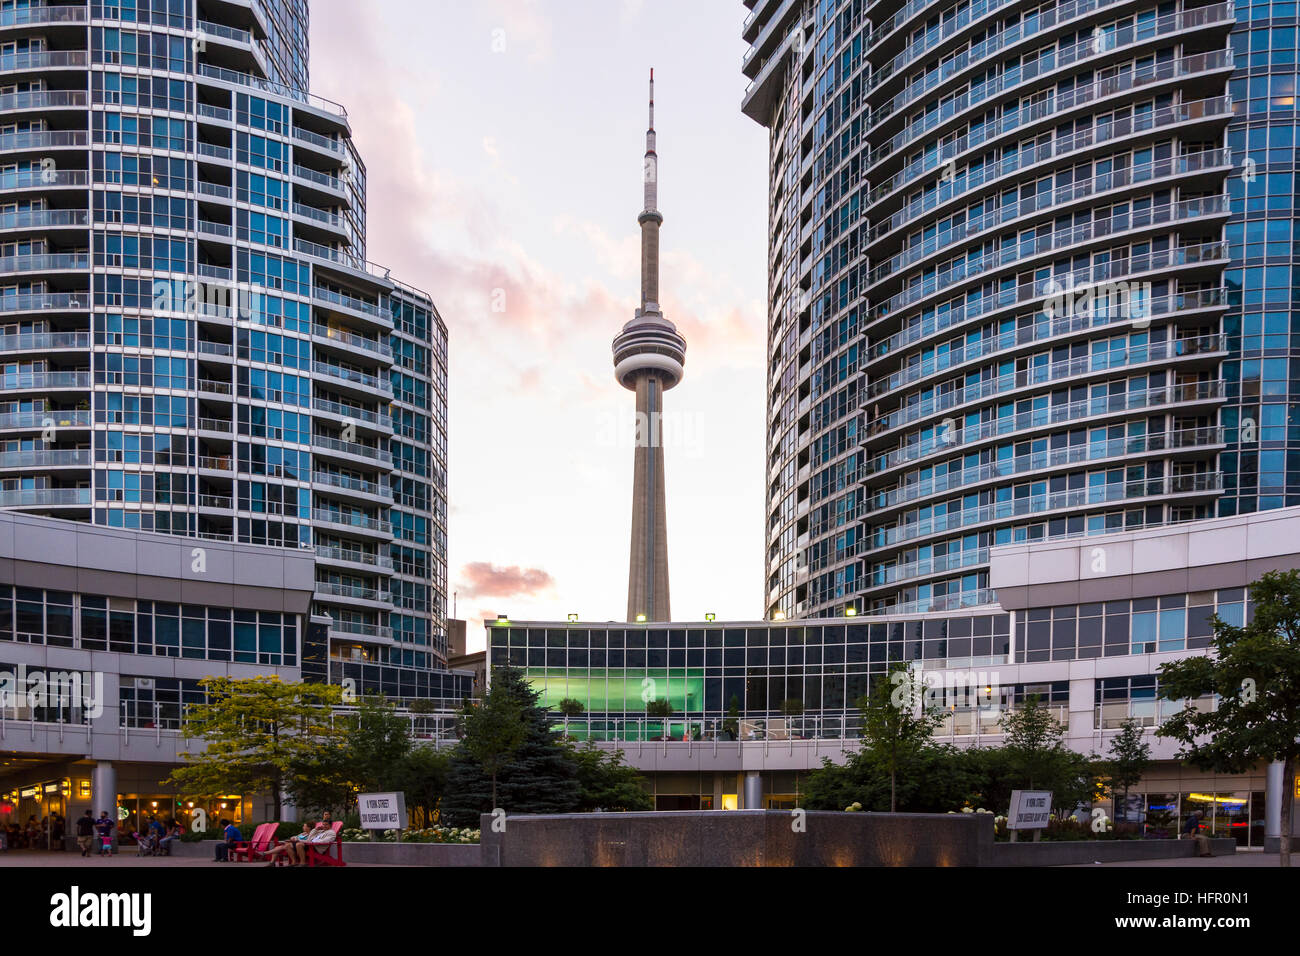 Toronto,Canada-august 2,2015:view of the CN tower in Toronto during a sunset from one of the central street of the city near the union station. Stock Photo